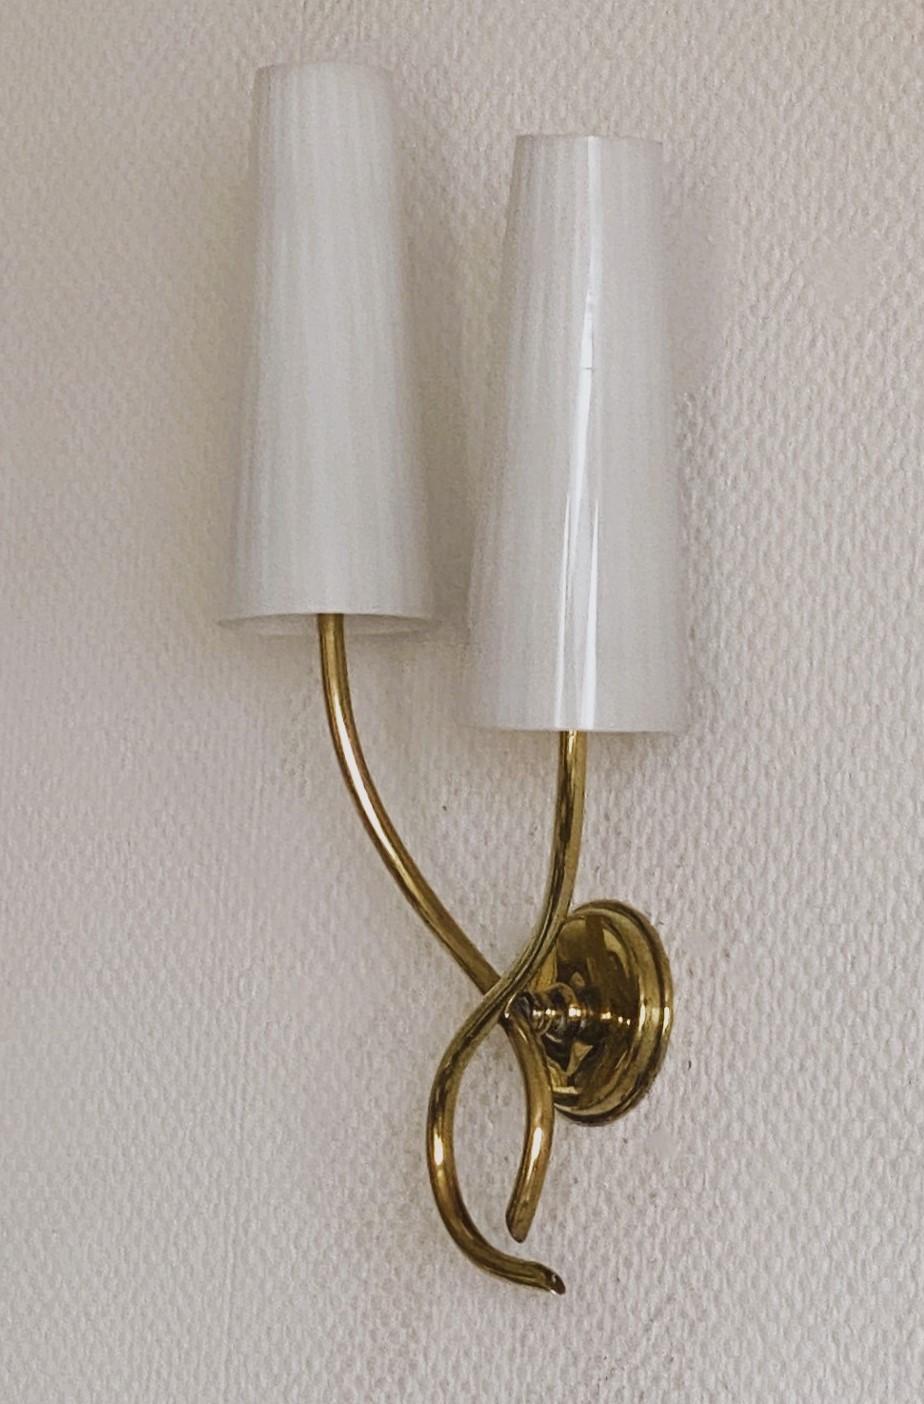 Pair of French Maison Lunel Brass Opal Glass Two-Light Wall Sconces, 1950s For Sale 2